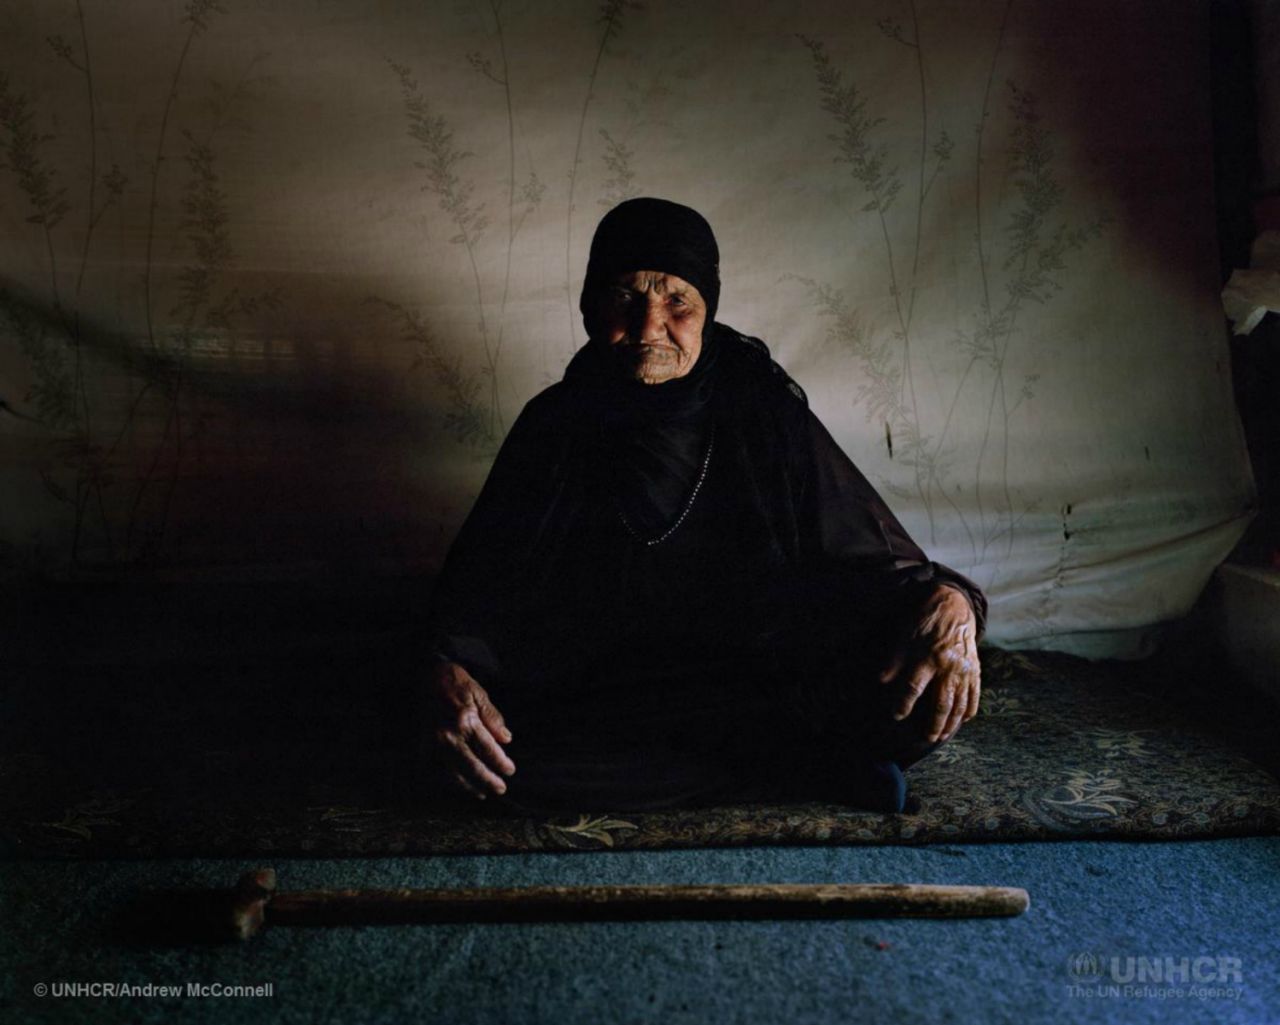 Mental health is an important issue among refugees as people suffer from the loss and trauma of displacement and treatment options remain scarce. Pictured, Khadra Al Halabi, 104, inside her family's shelter at a tented settlement in the Bekaa Valley, Lebanon whose health has deteriorated since being forced to leave her home.